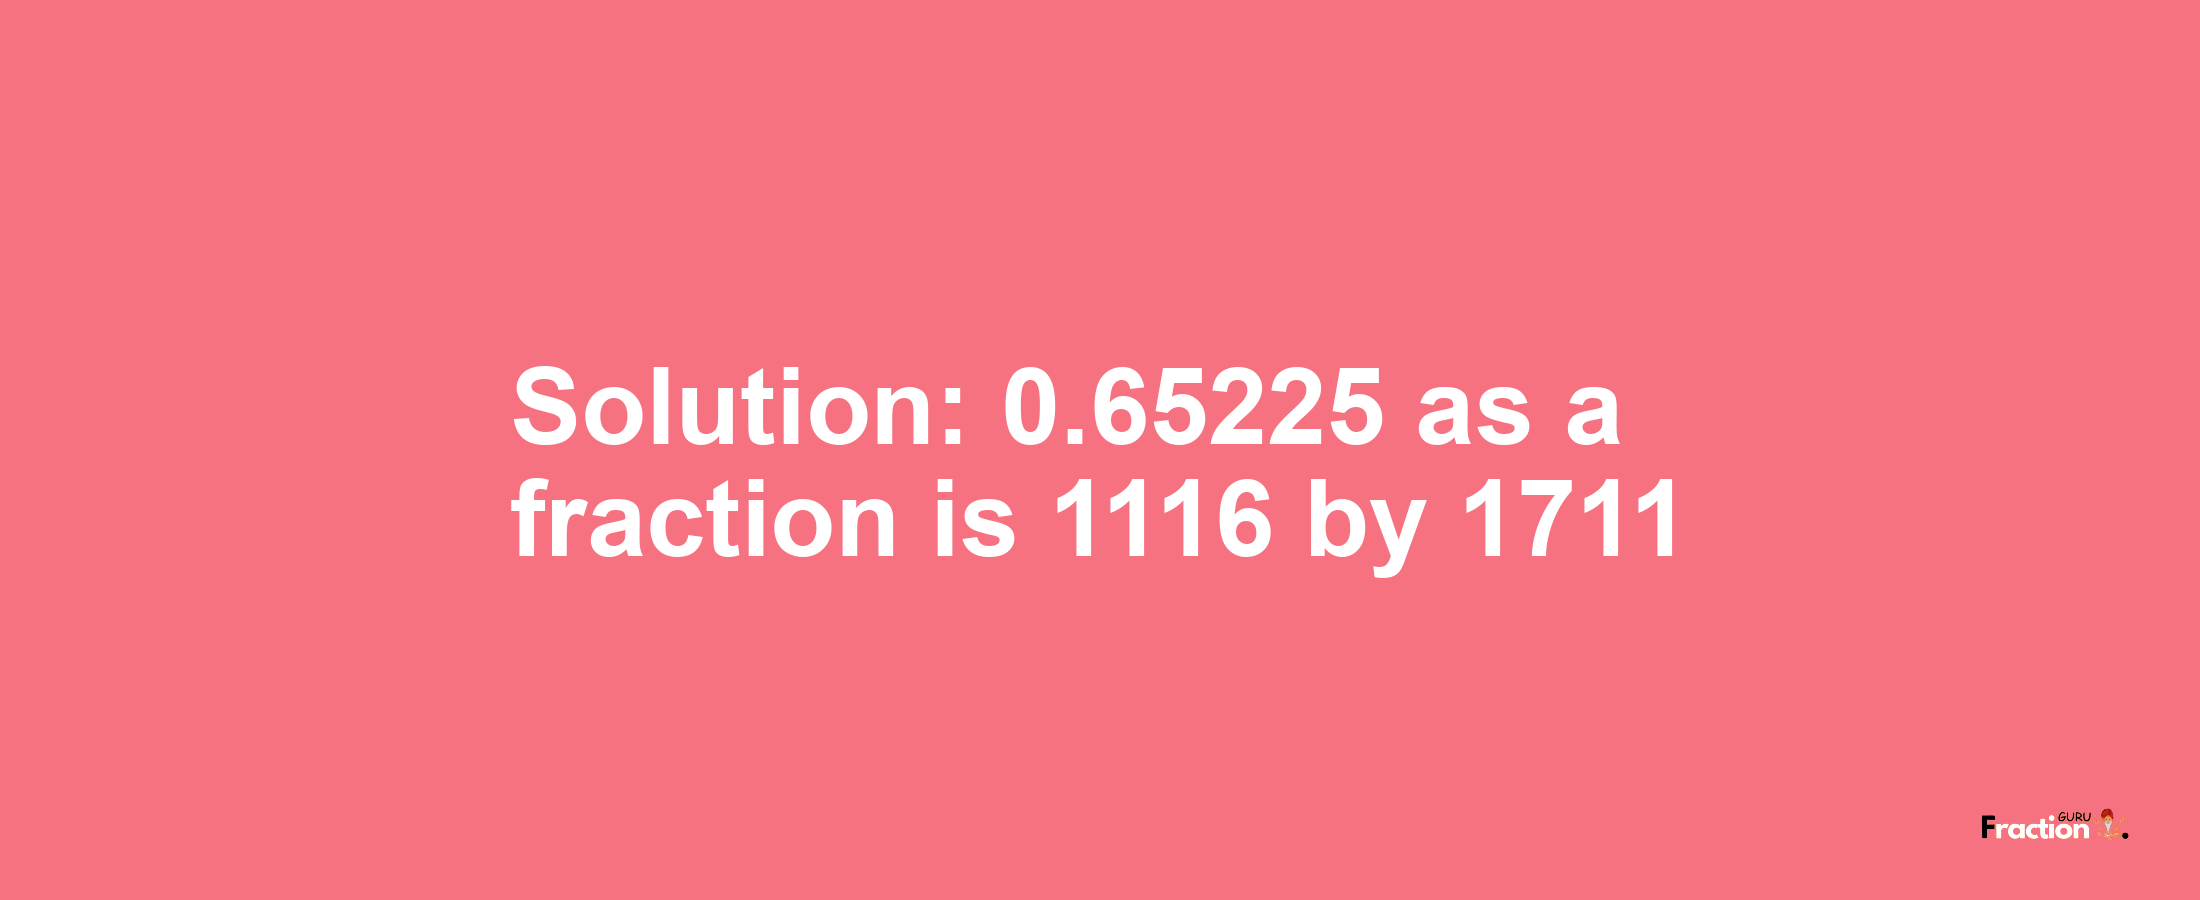 Solution:0.65225 as a fraction is 1116/1711